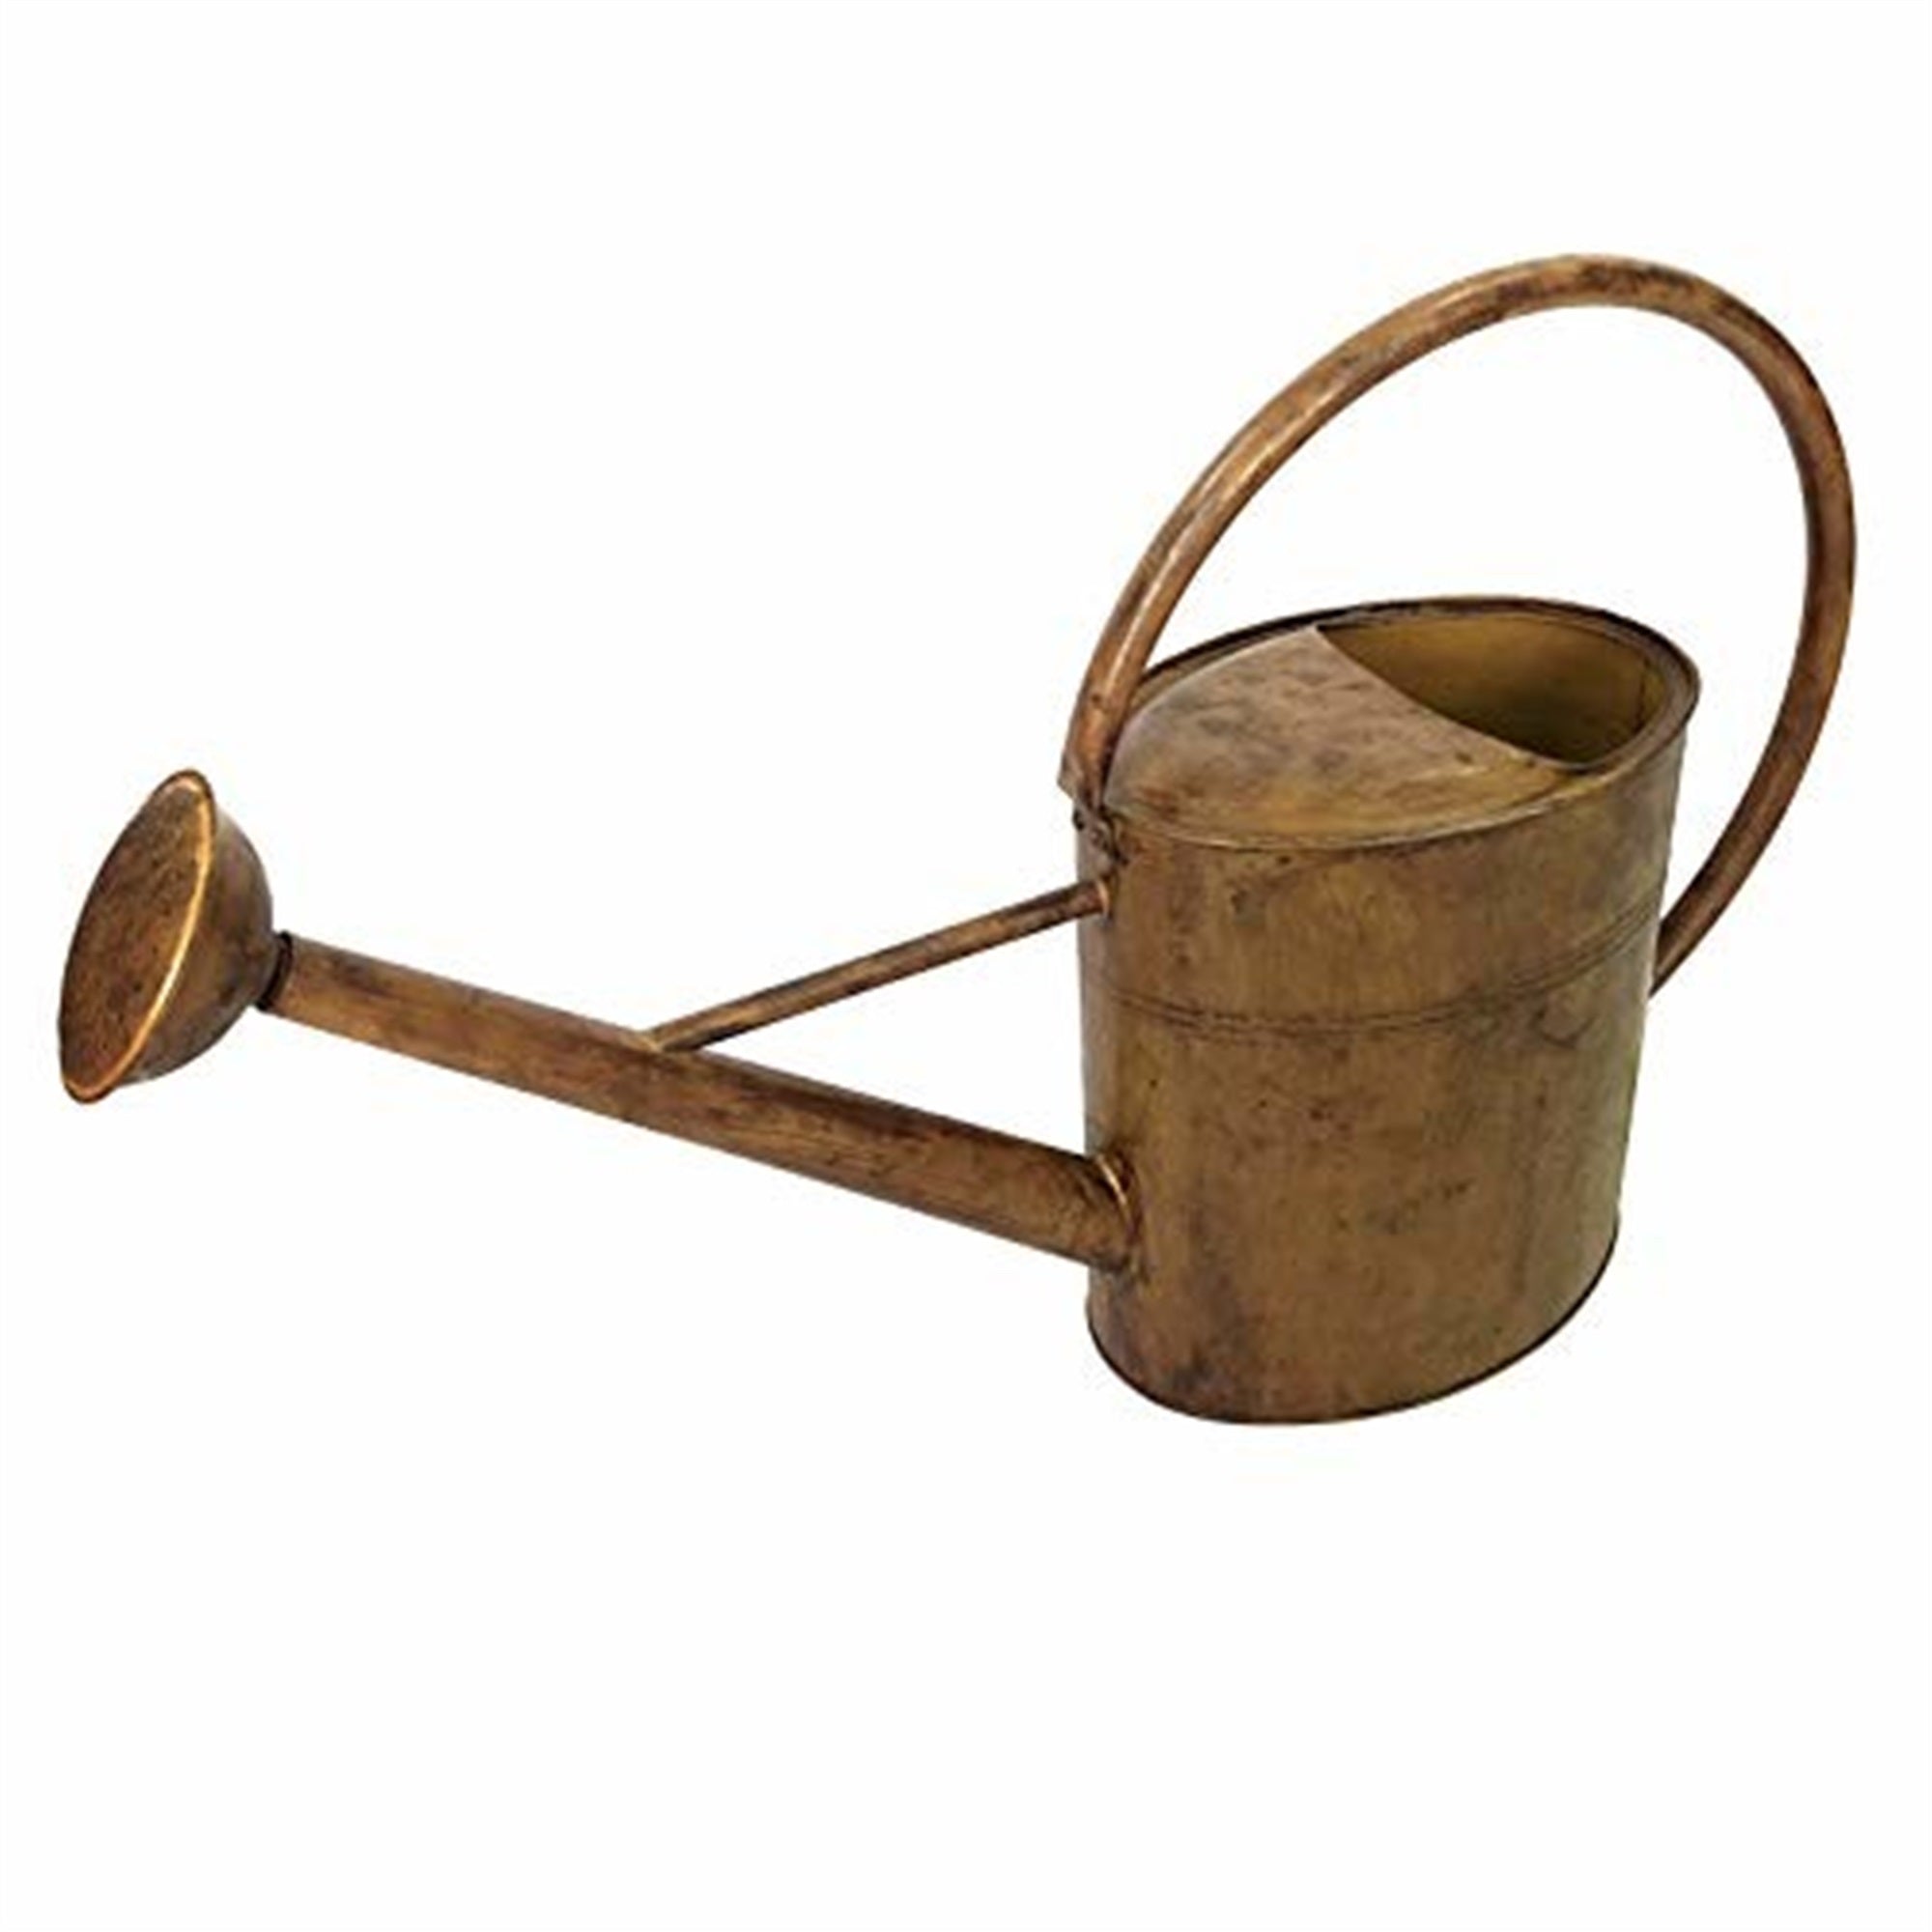 Gardener Select Farmhouse Oval Metal Watering Can, Rusty 7L (1.85 gallons)